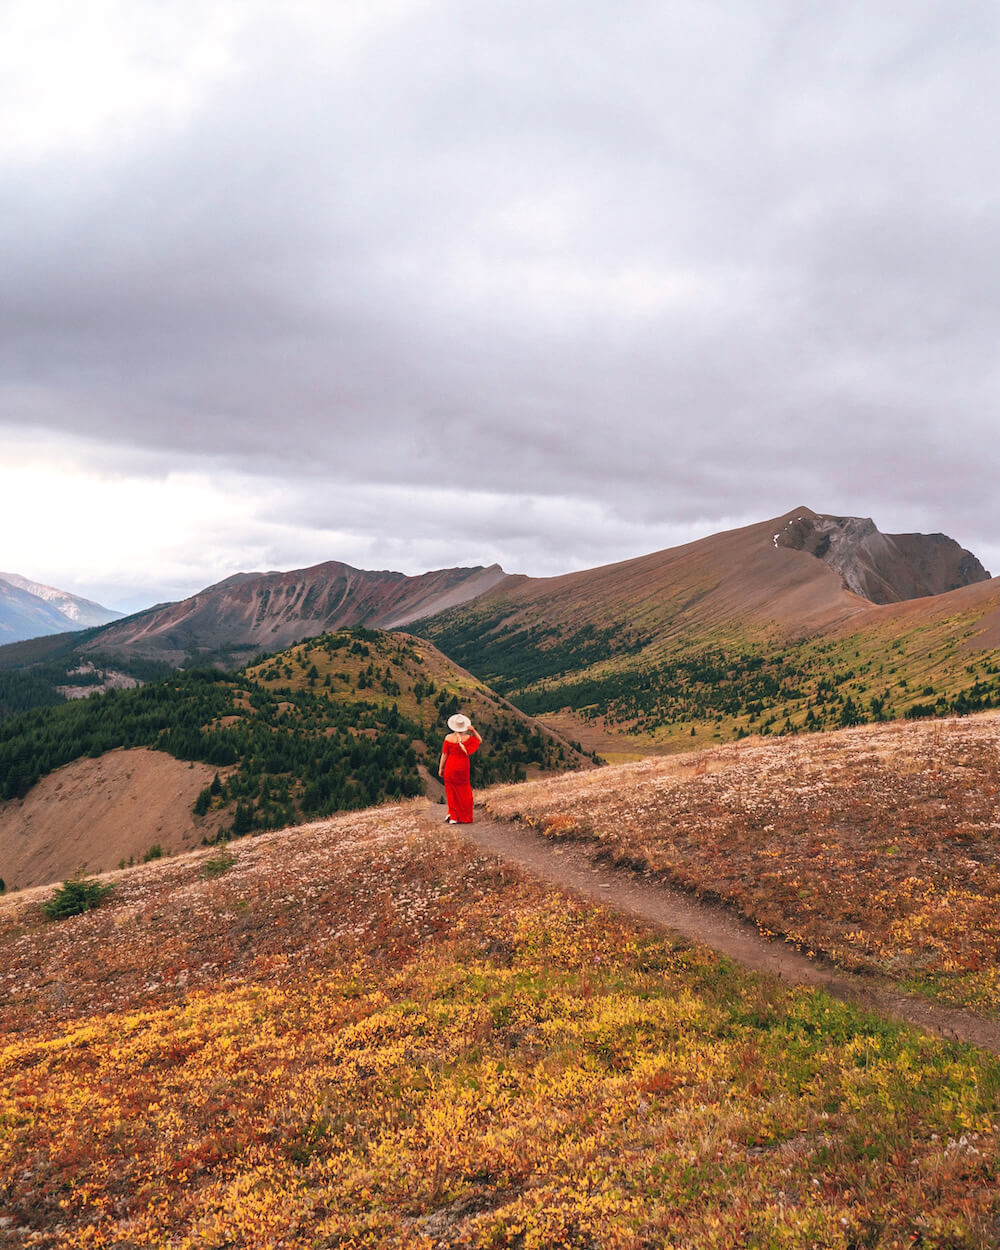 Planning a trip to Jasper National Park soon? Here's a local's guide to some of the best things to do in Jasper. From hikes and trails to adventure sports, family friendly excursions, dining experiences and more. You won't want to miss this guide of the best things to do and places to see in Jasper. Pictured here: Opal Hills Hike